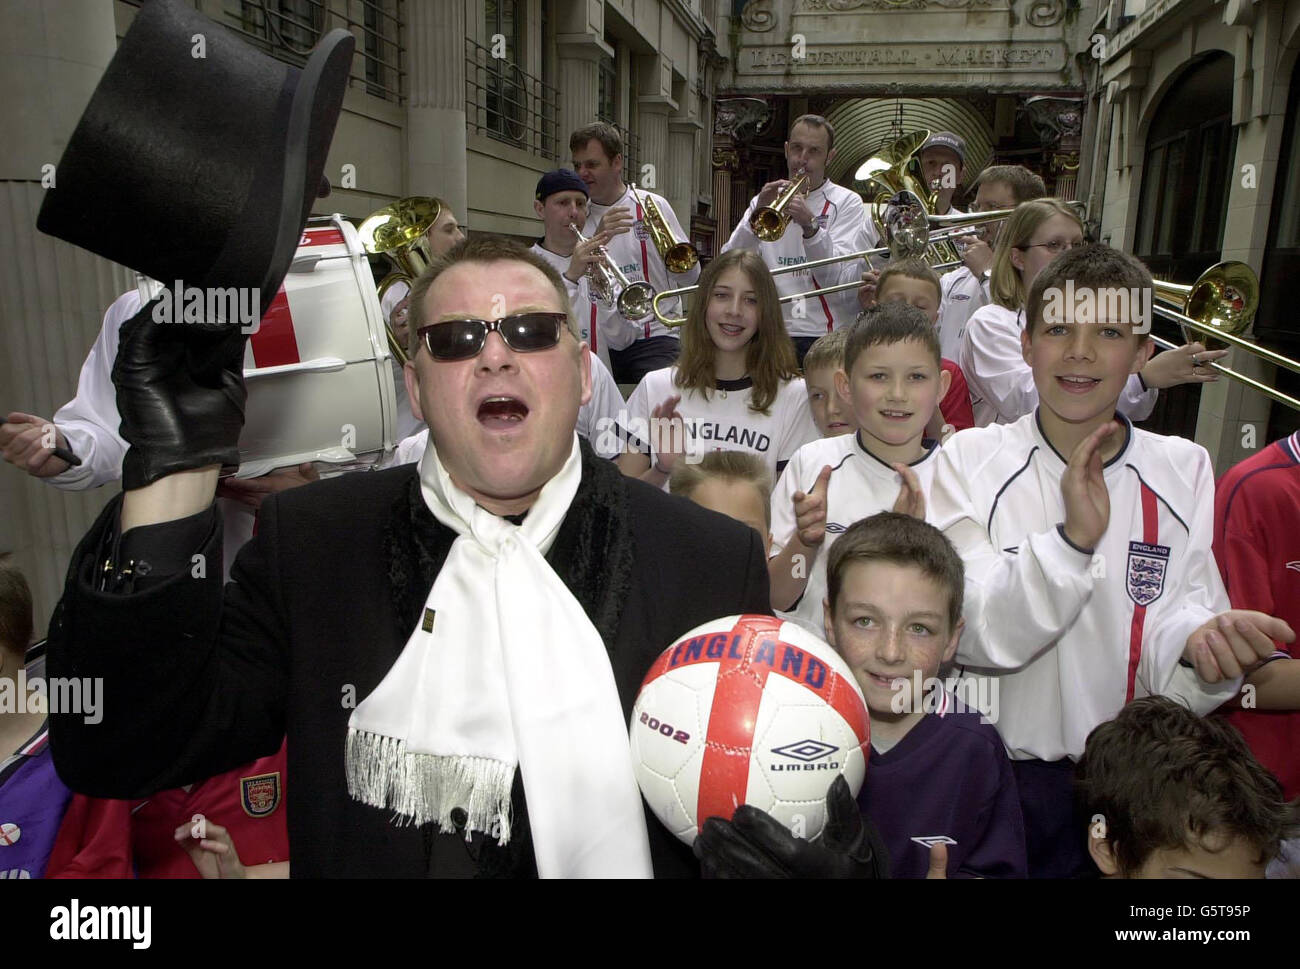 Chas Smash (left) formerly of the pop group Madness, with the England brass band and young football fans in the city of London, to make the video to his World Cup anthem 'We're coming over' which will be released on the 27th May. * The song is one of a number that are being released in the run up to the World Cup in Japan and South Korea this Summer. Stock Photo